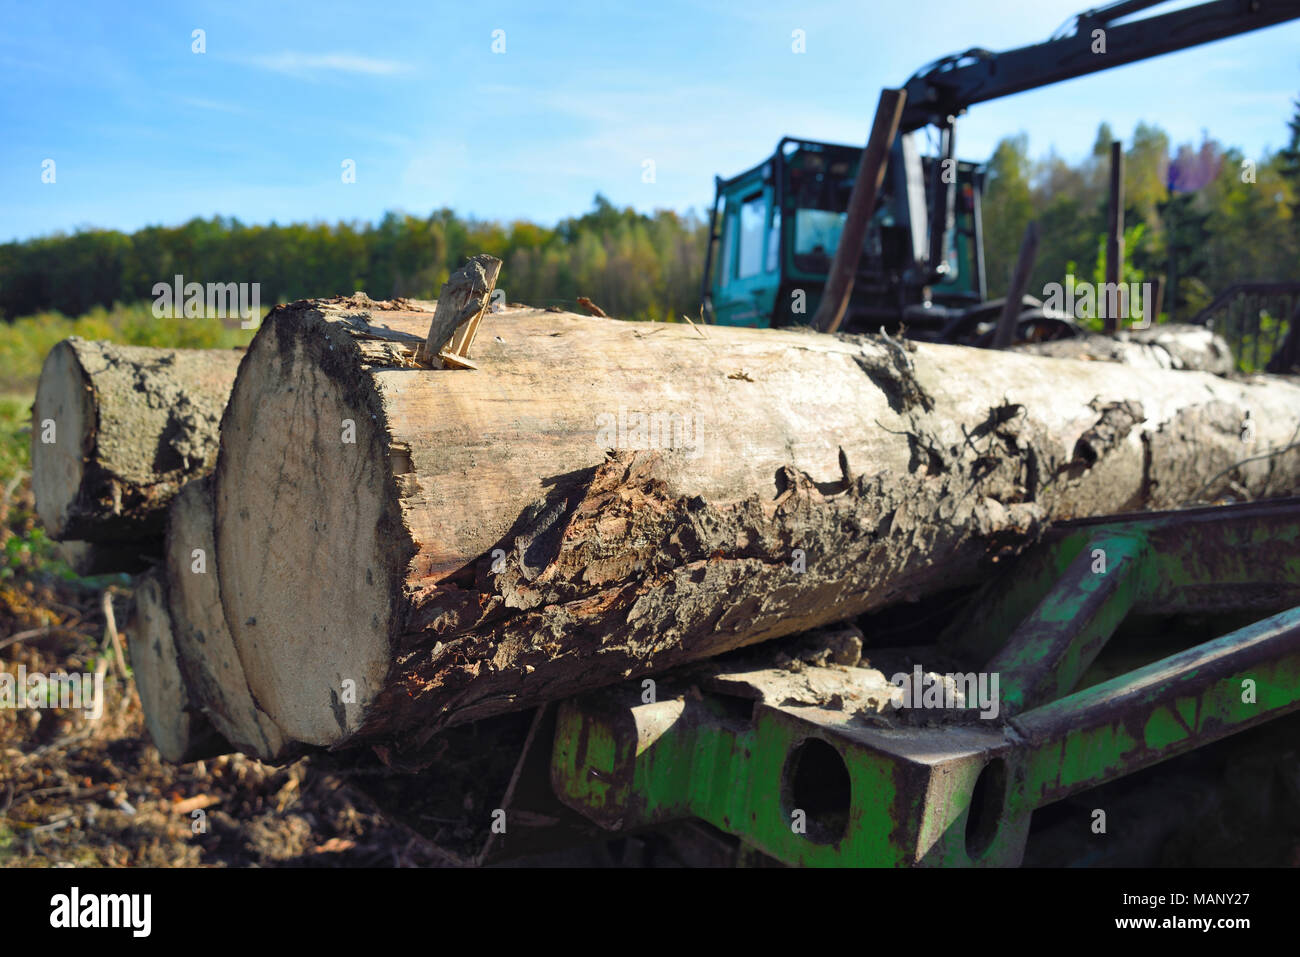 Lumber industry scene with pile of wood or tree trunks and tractor machinery. Stock Photo